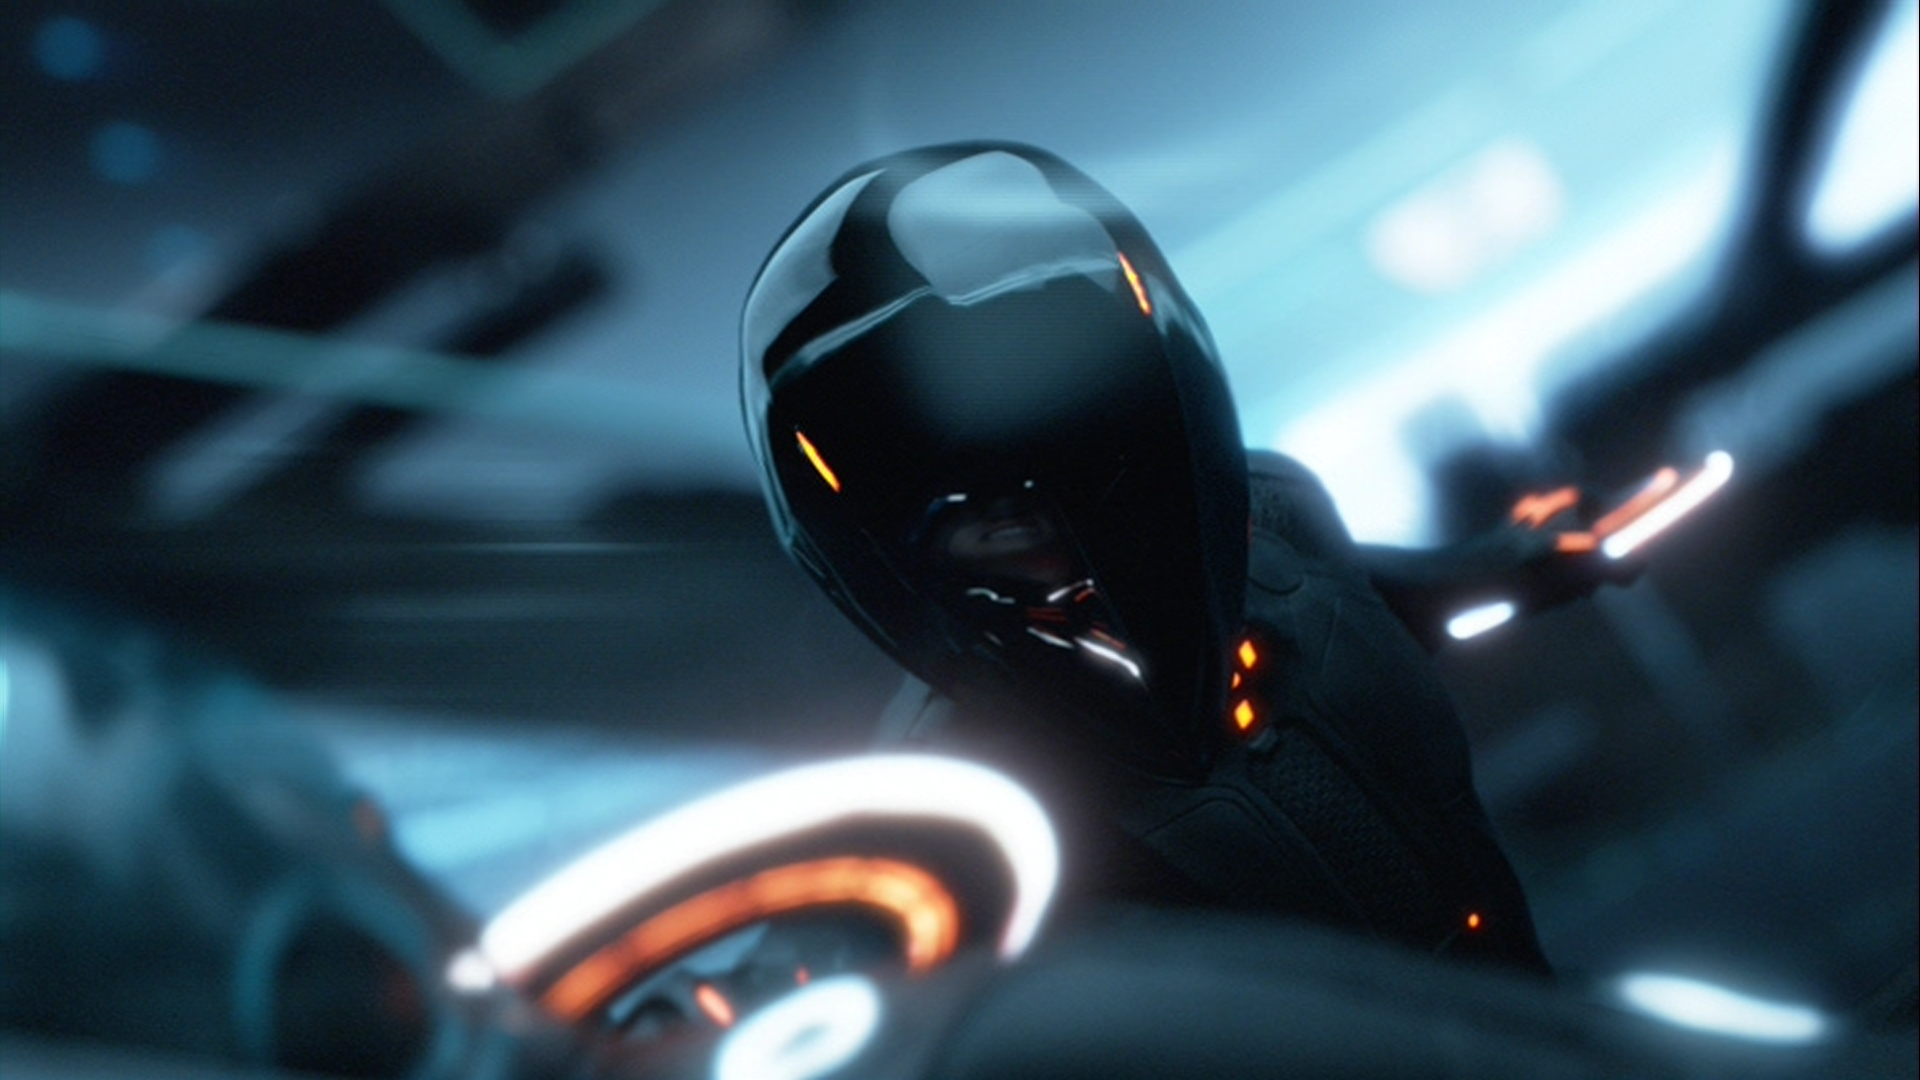 Tron Legacy images Tron Legacy WallPaper HD wallpaper and background 1920x1080